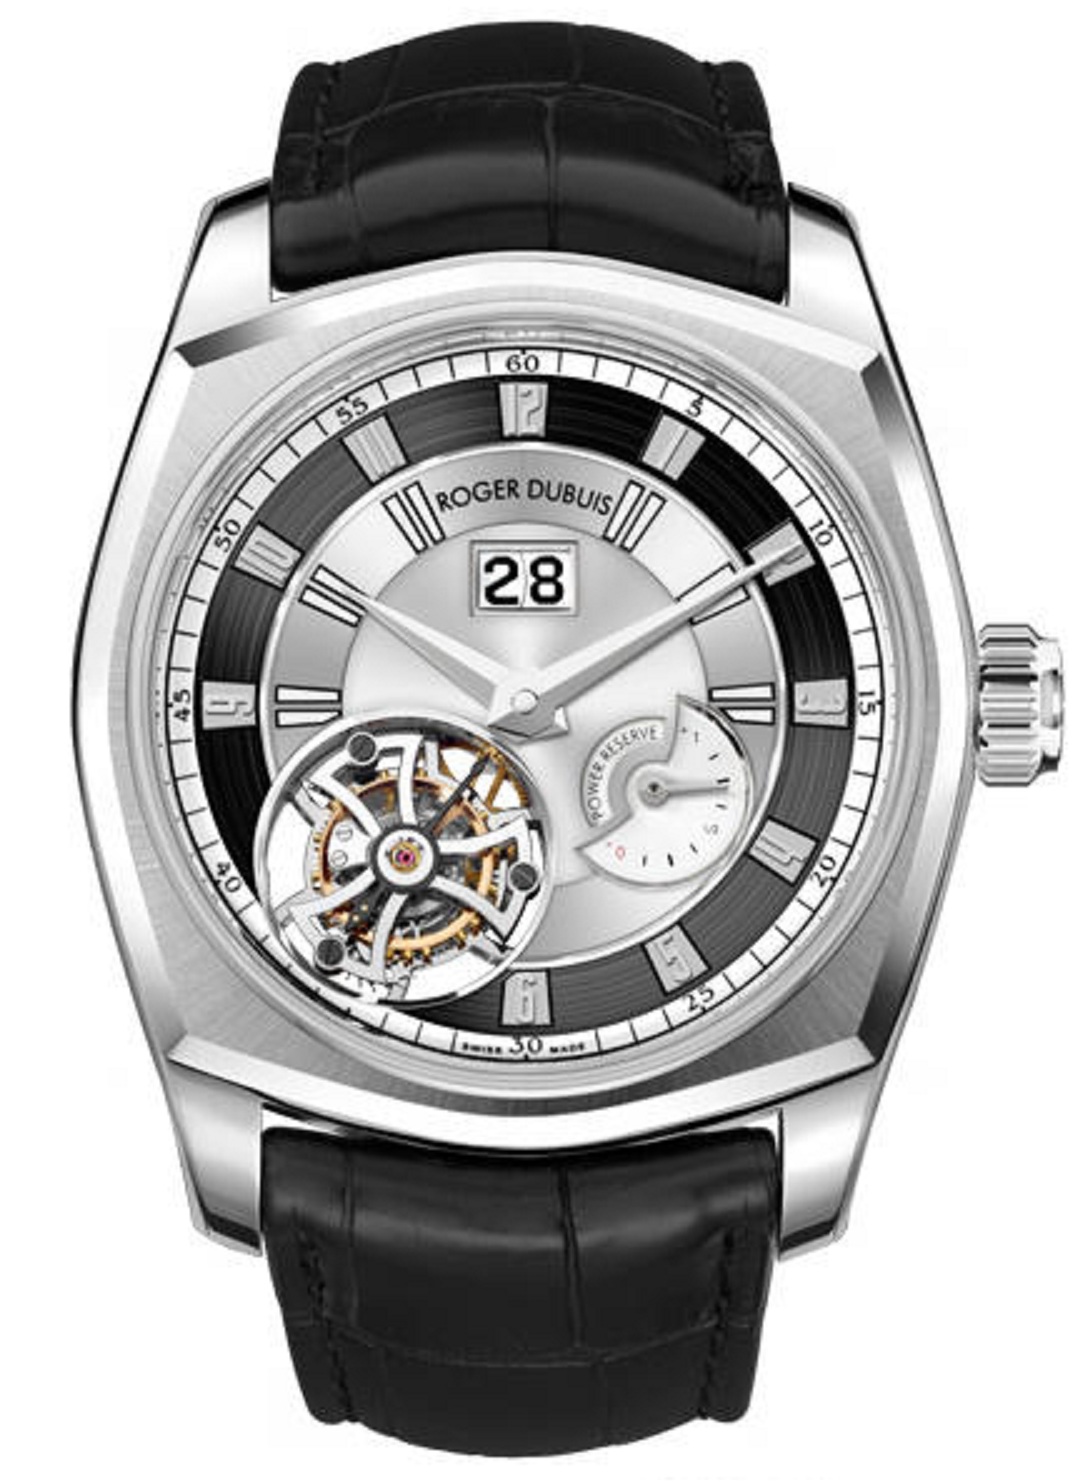 La Monegasque Flying Tourbillon in Platinum - Limited Edition 28pcs. on Black Leather Strap with Silver Dial